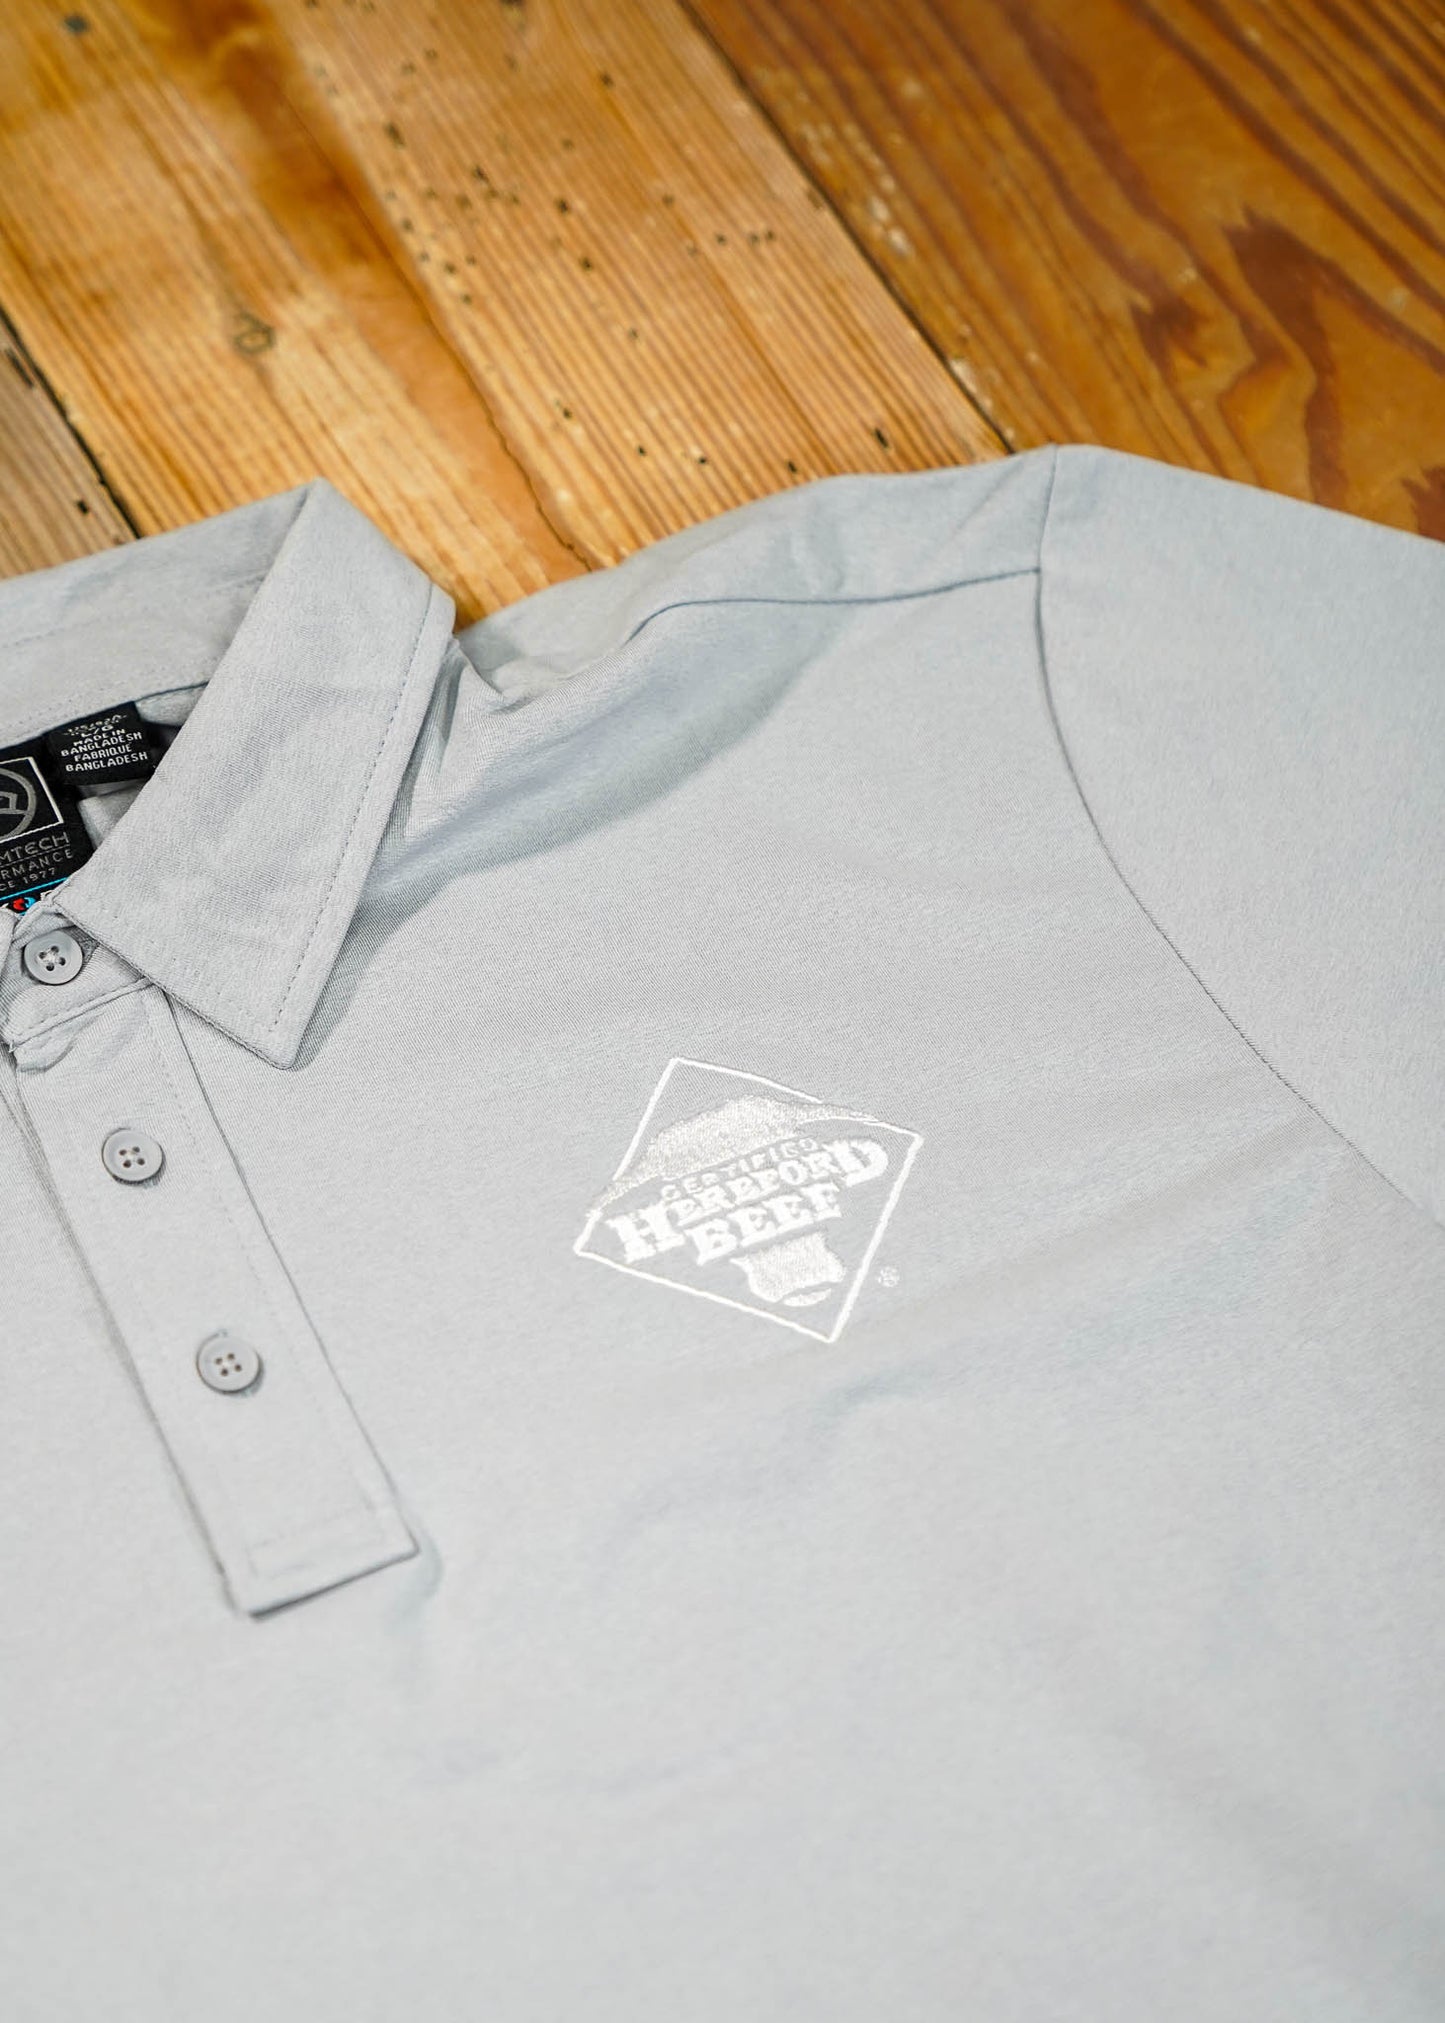 Certified Hereford Beef Men's Polo Shirt - Cool Silver